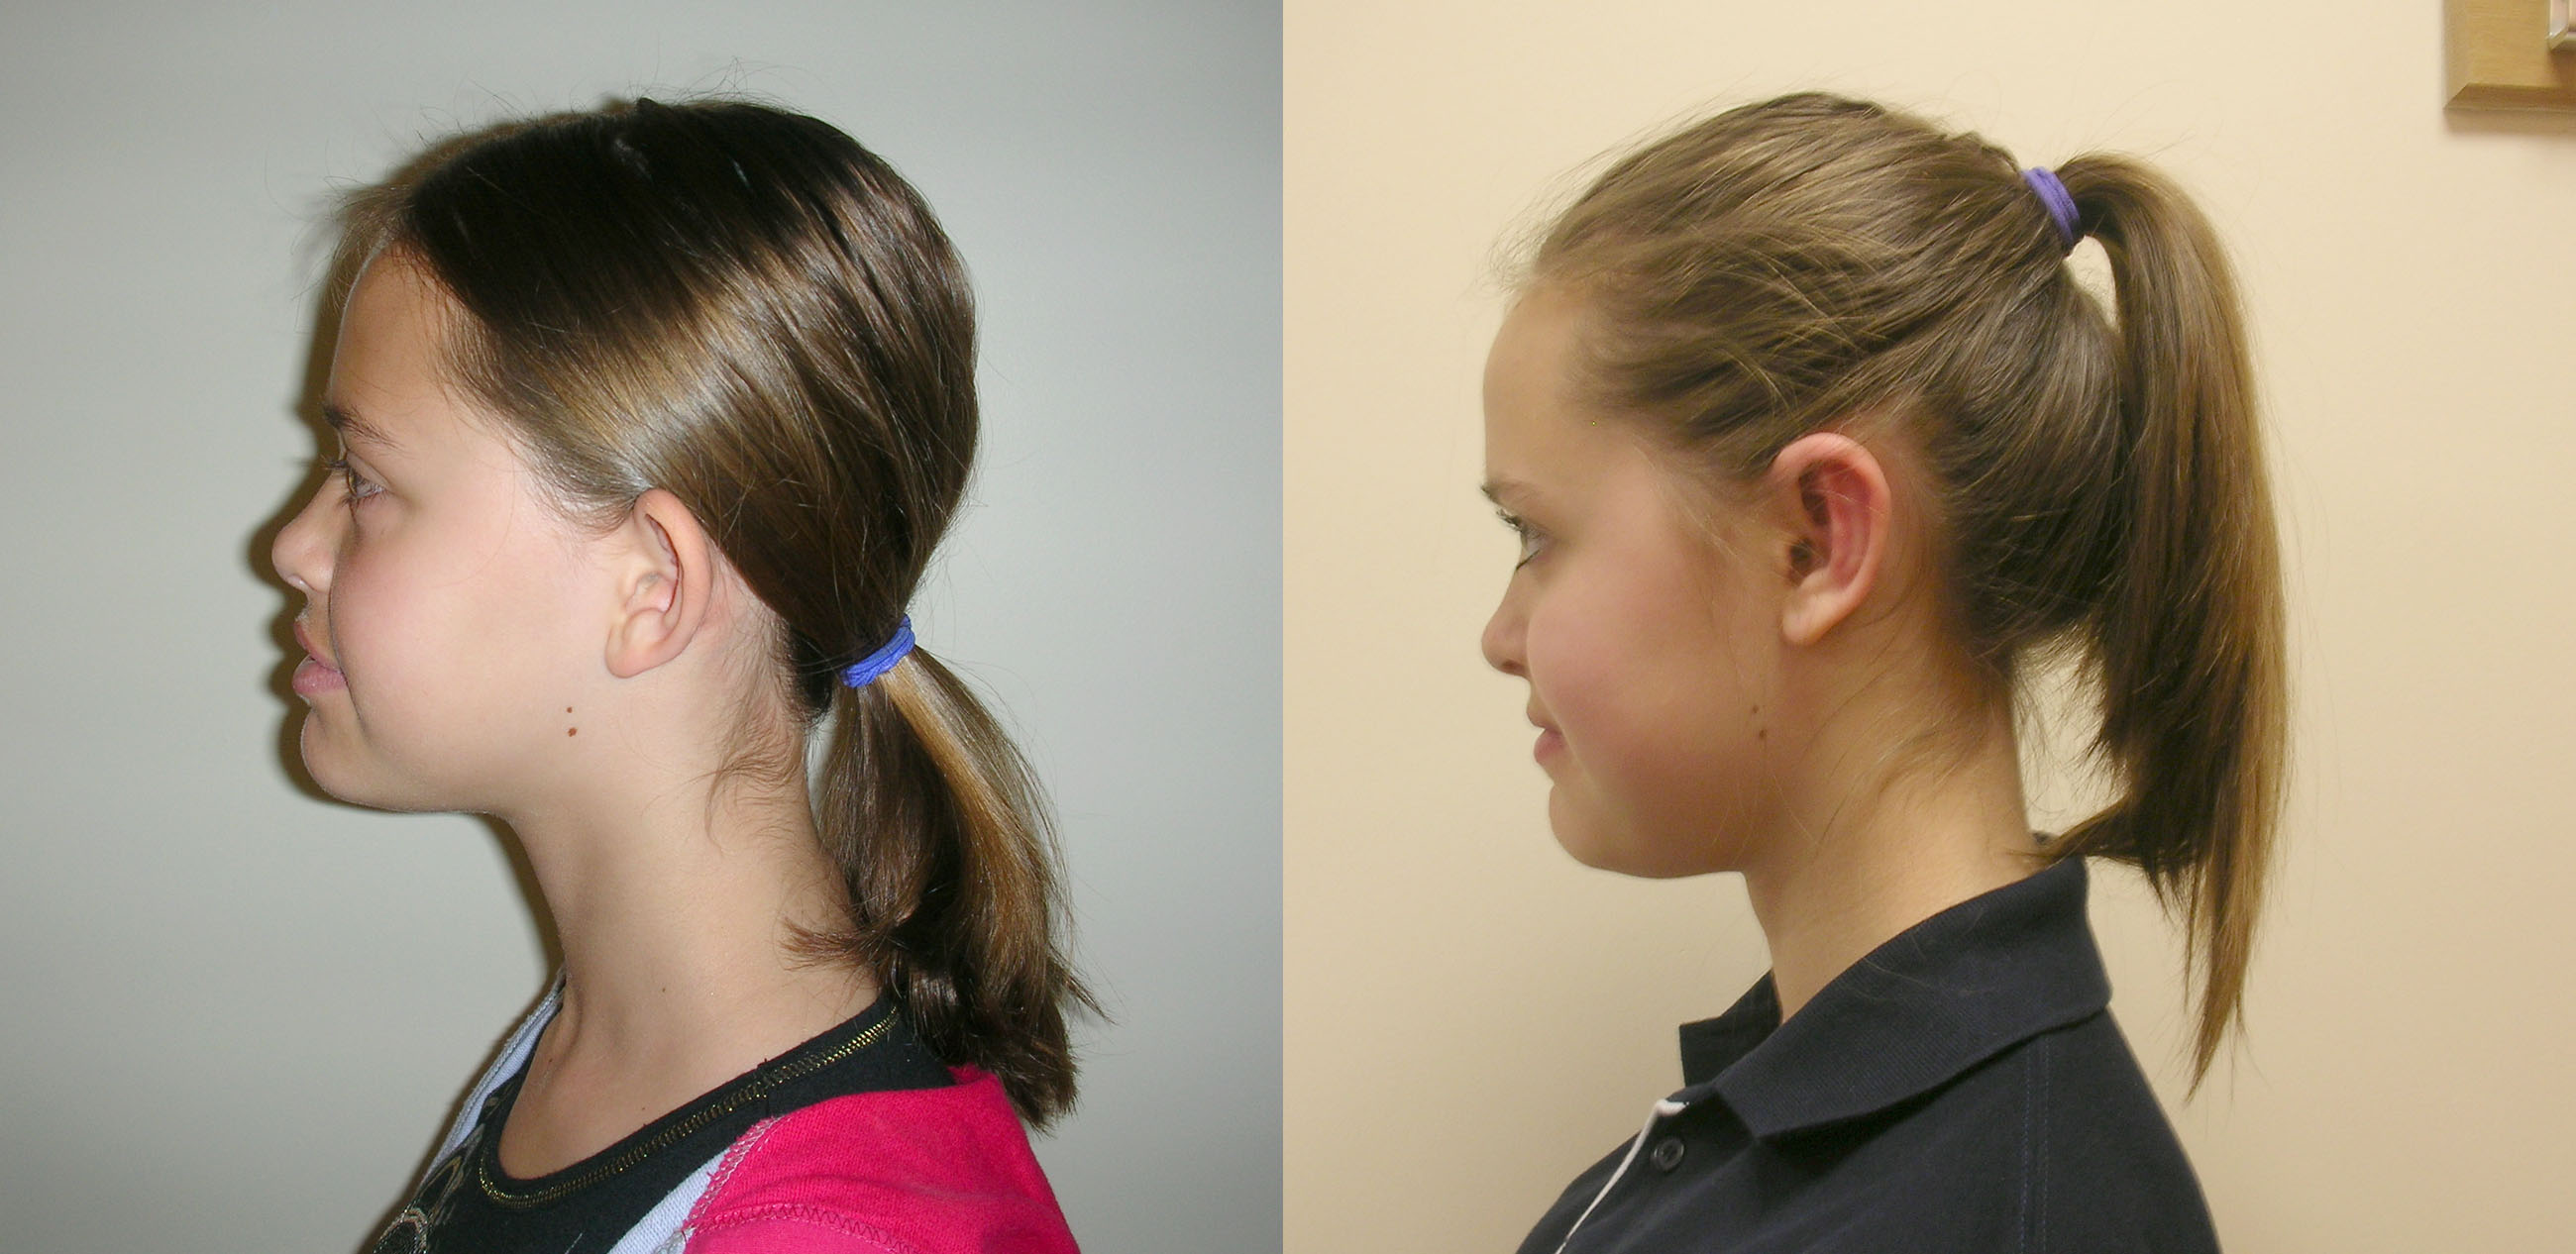 Prominent ears/pinnaplasty surgery in Manchester and London